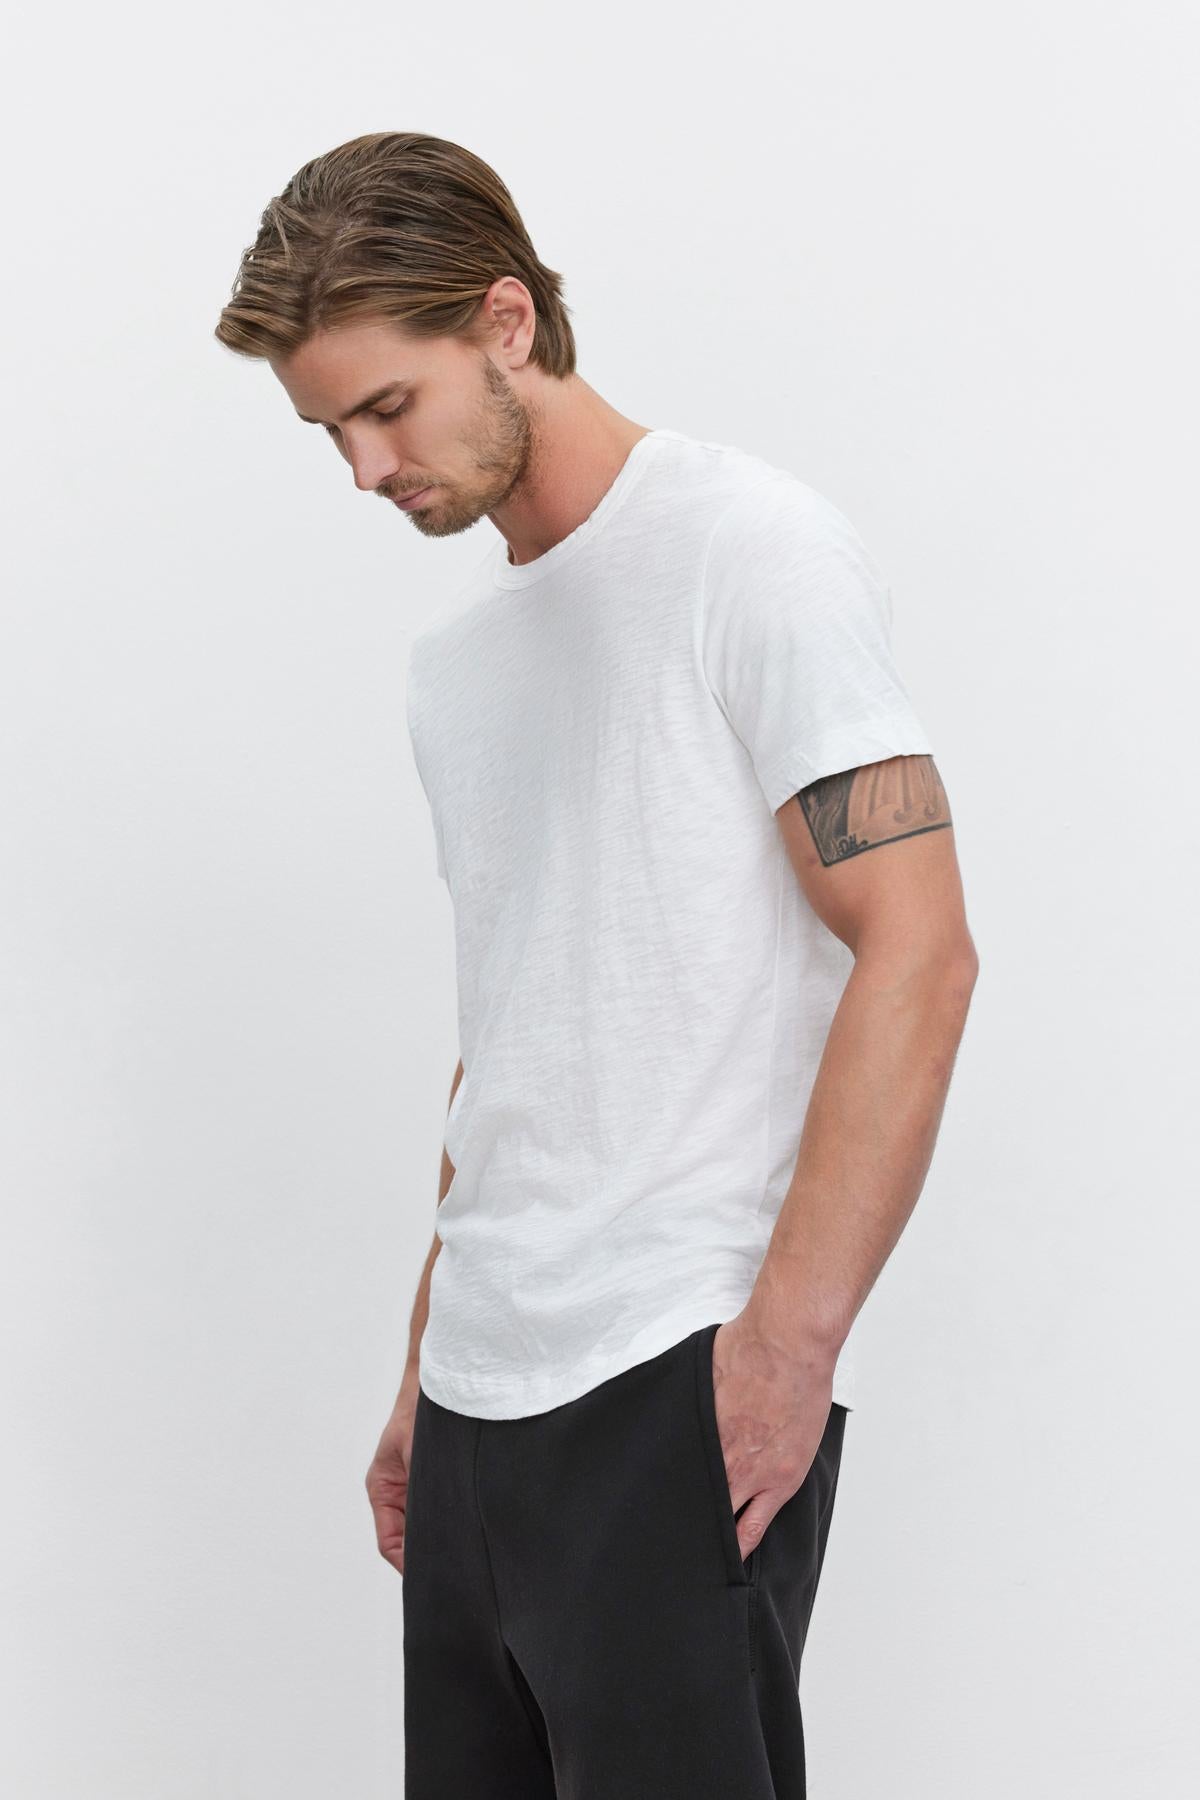 Man in a white crew neck Velvet by Graham & Spencer AMARO TEE with a heathered texture and black pants, looking downwards with a tattoo visible on his left arm.-35867457552577